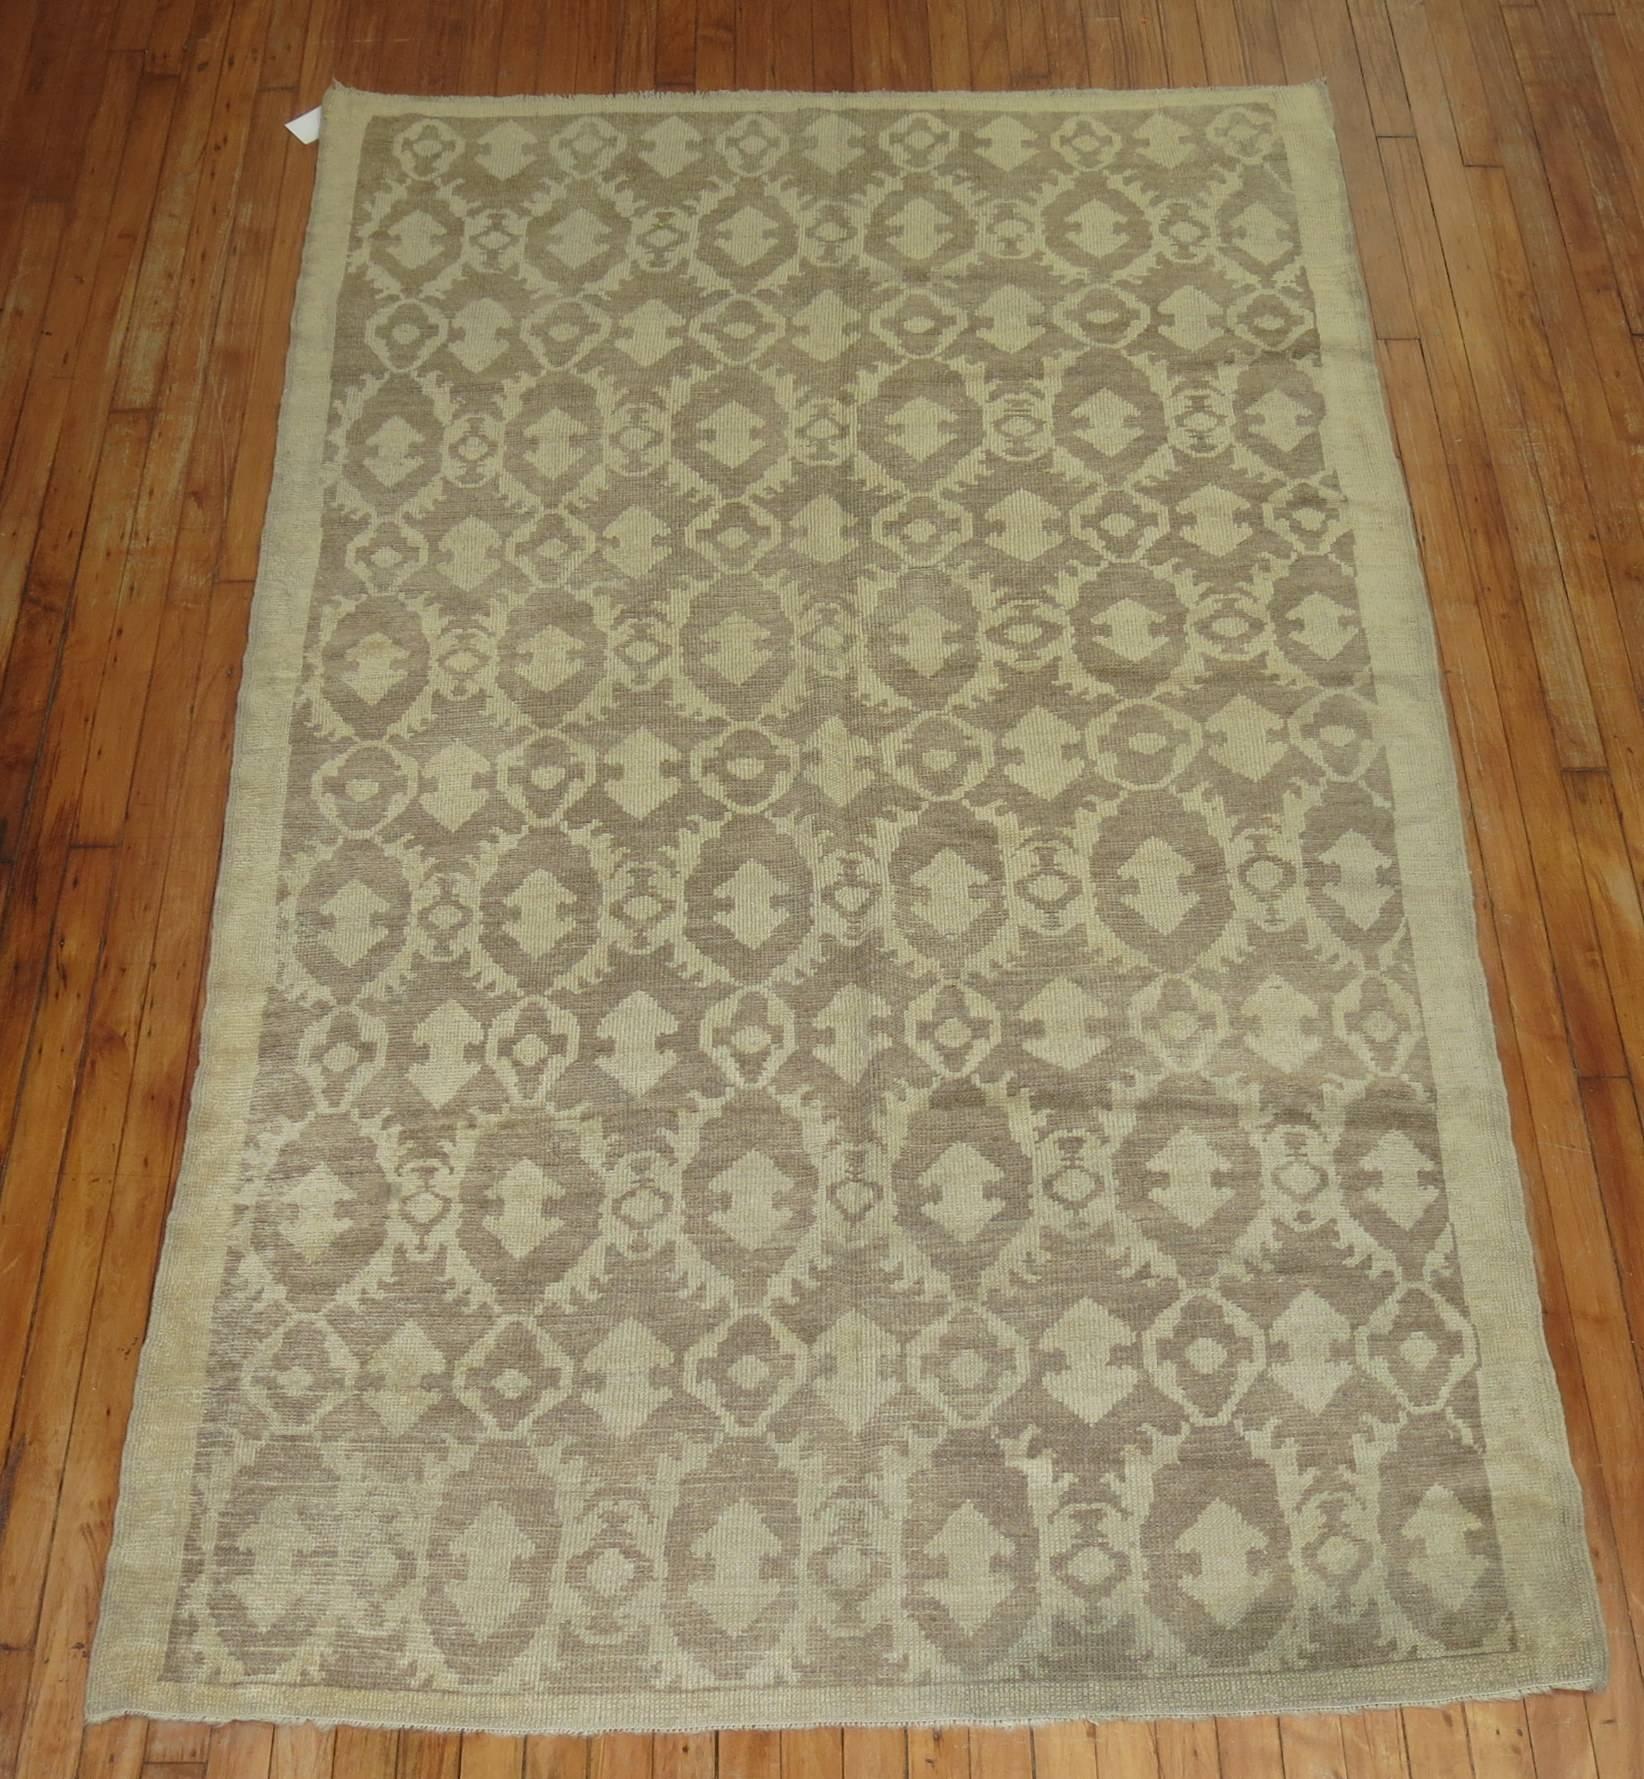 Decorative 20th century Turkish rug in taupes and tans with a compelling repetitive pattern. Affordably priced too.

4'9'' x 7'11''